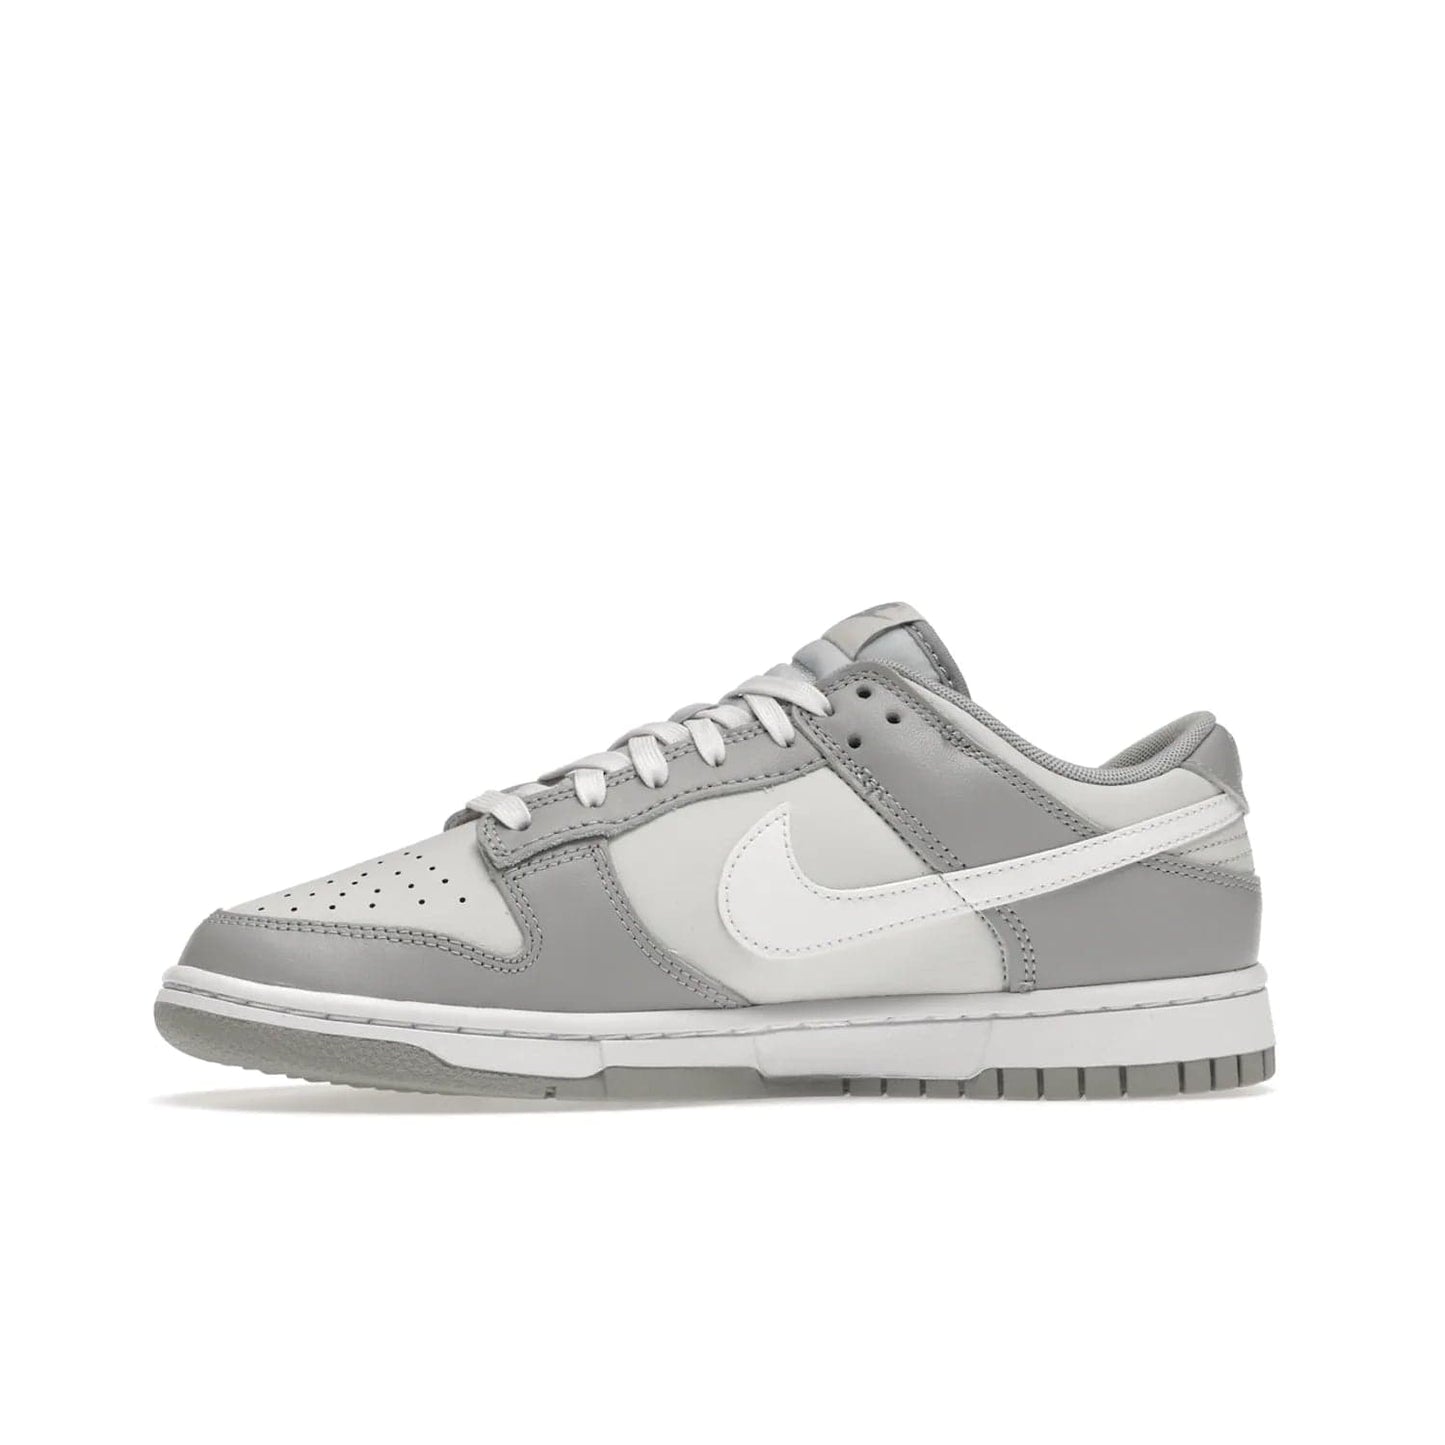 Nike Dunk Low Two Tone Grey - Image 18 - Only at www.BallersClubKickz.com - Fresh Nike Dunk Low Two Tone Grey leather/overlay Sneaker. White Swoosh detailing, nylon tongue, woven label and Air Sole. Get yours and stay on the trend.